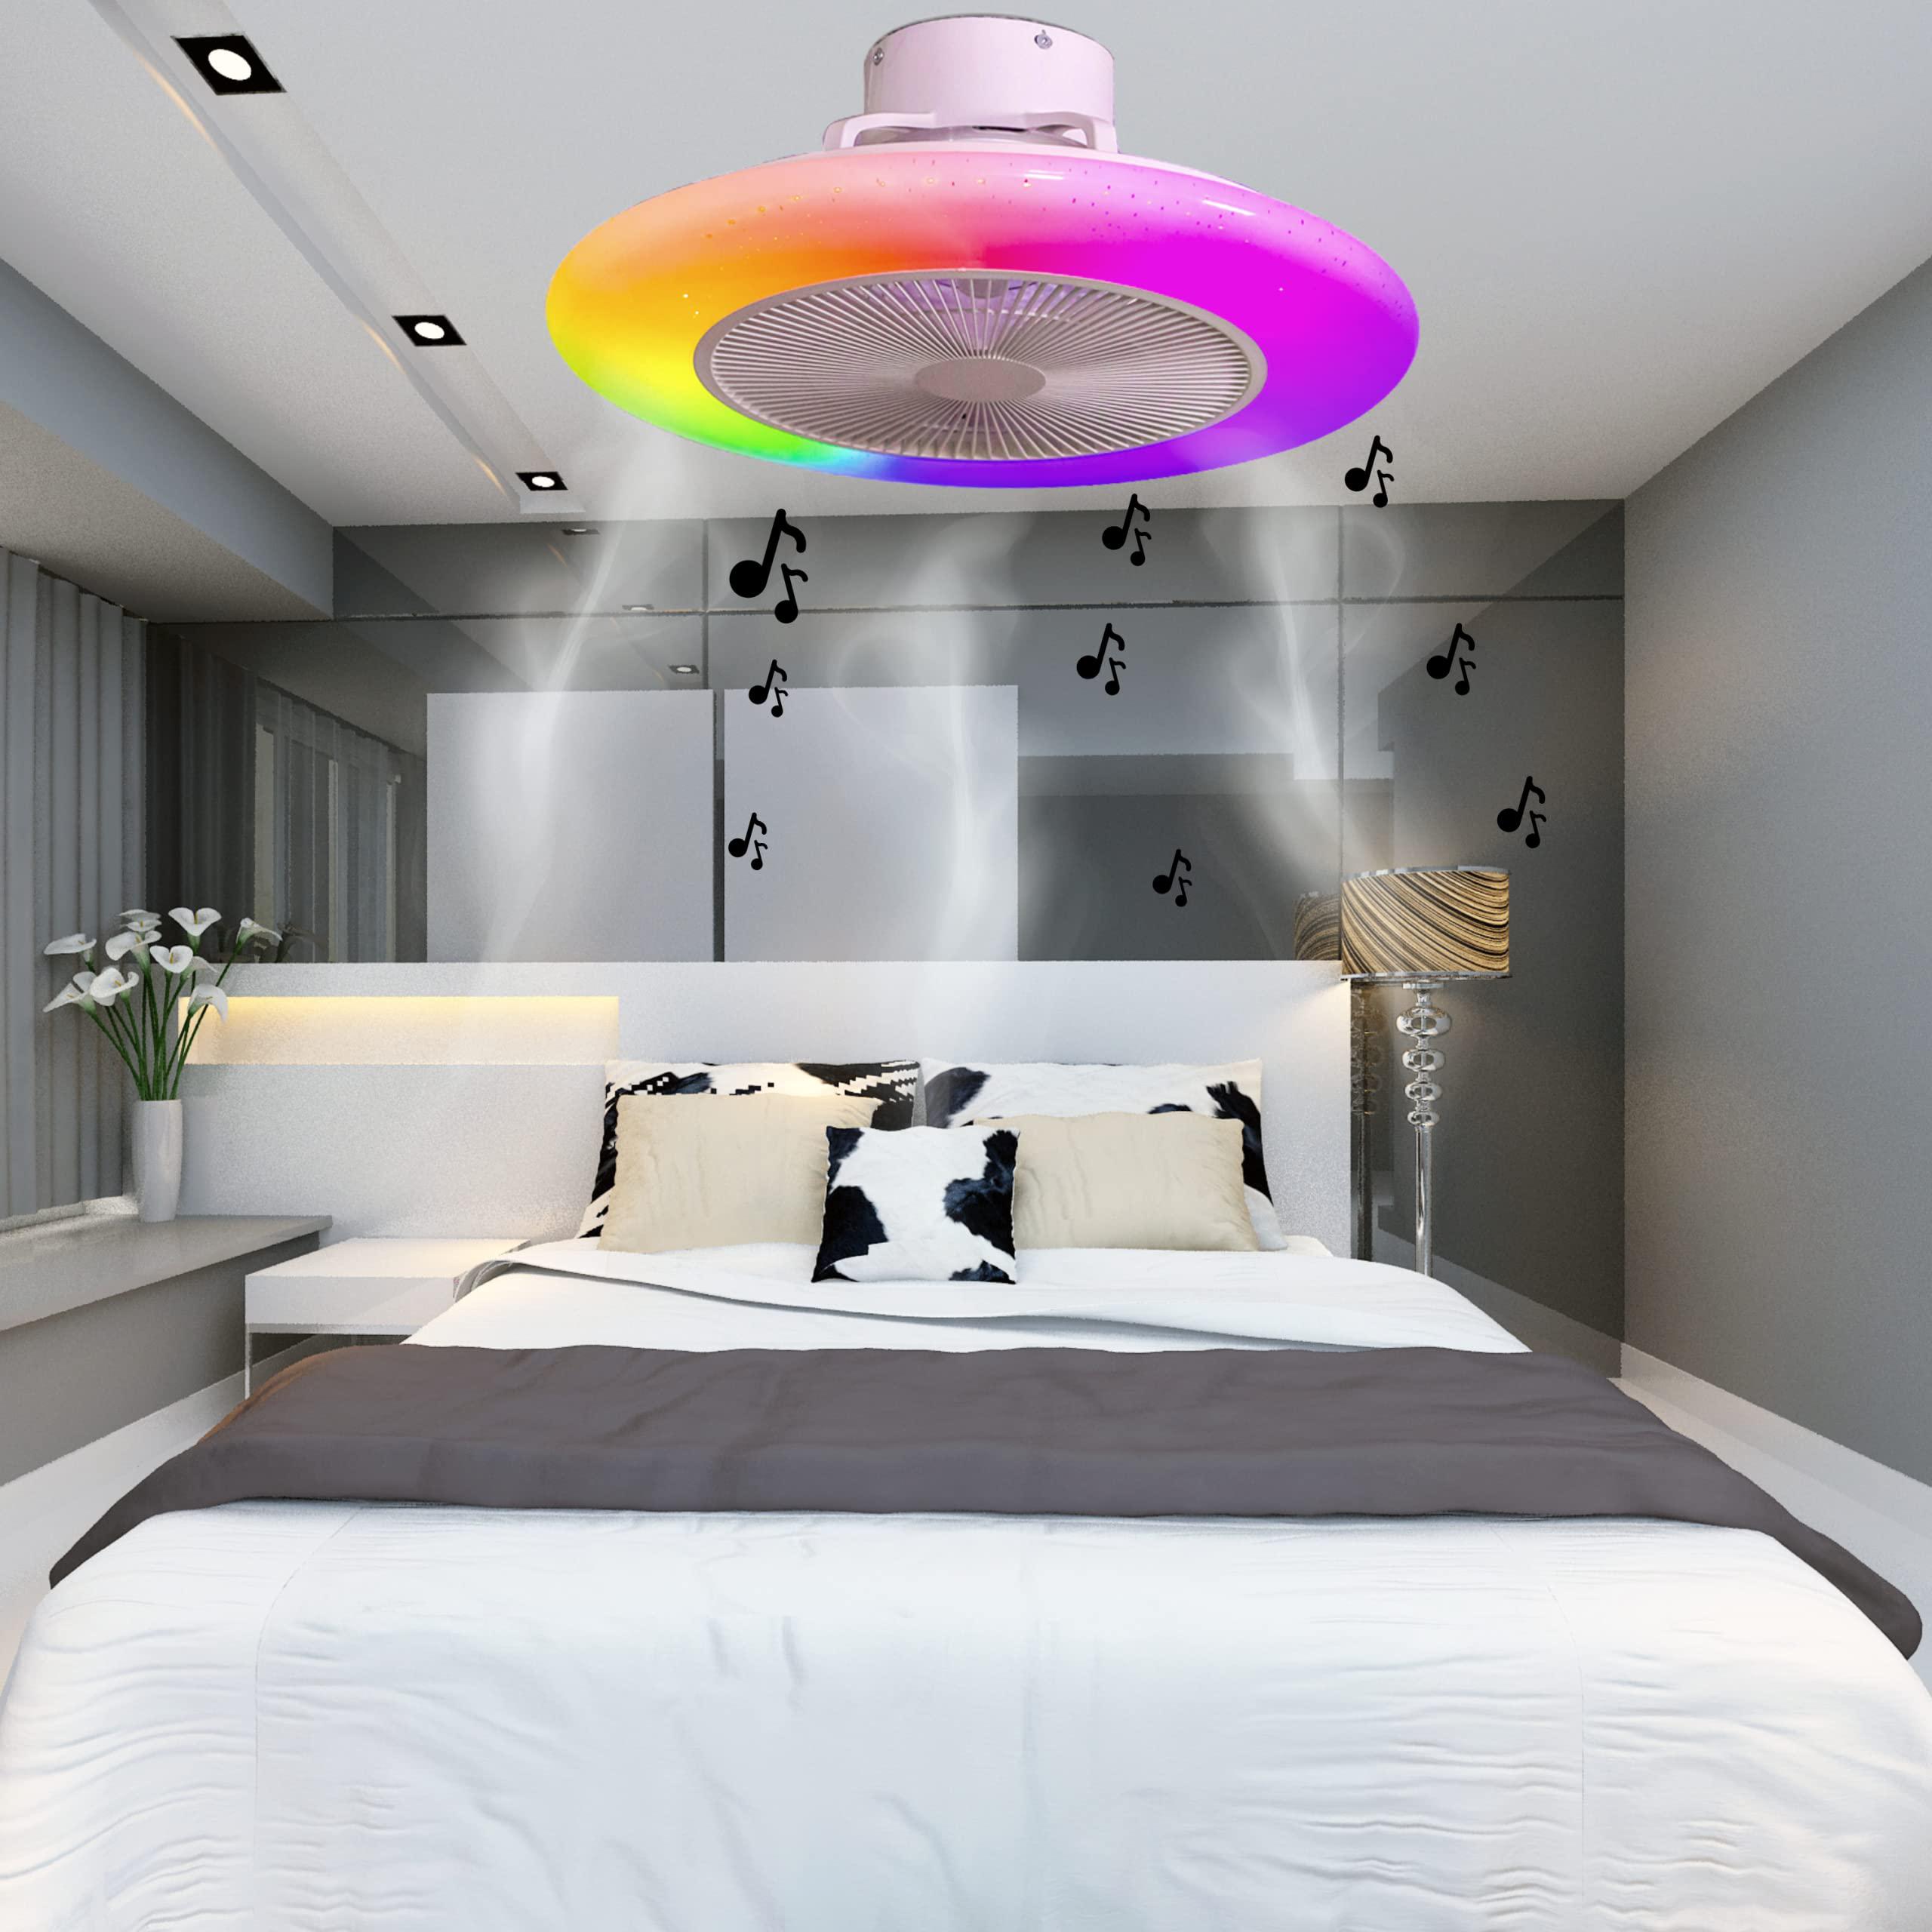 Trendy Home & Garden 22" low profile bladeless ceiling fan with light and bluetooth speaker - 3 in 1 indoor flush mount rgb dyson fan, led light w